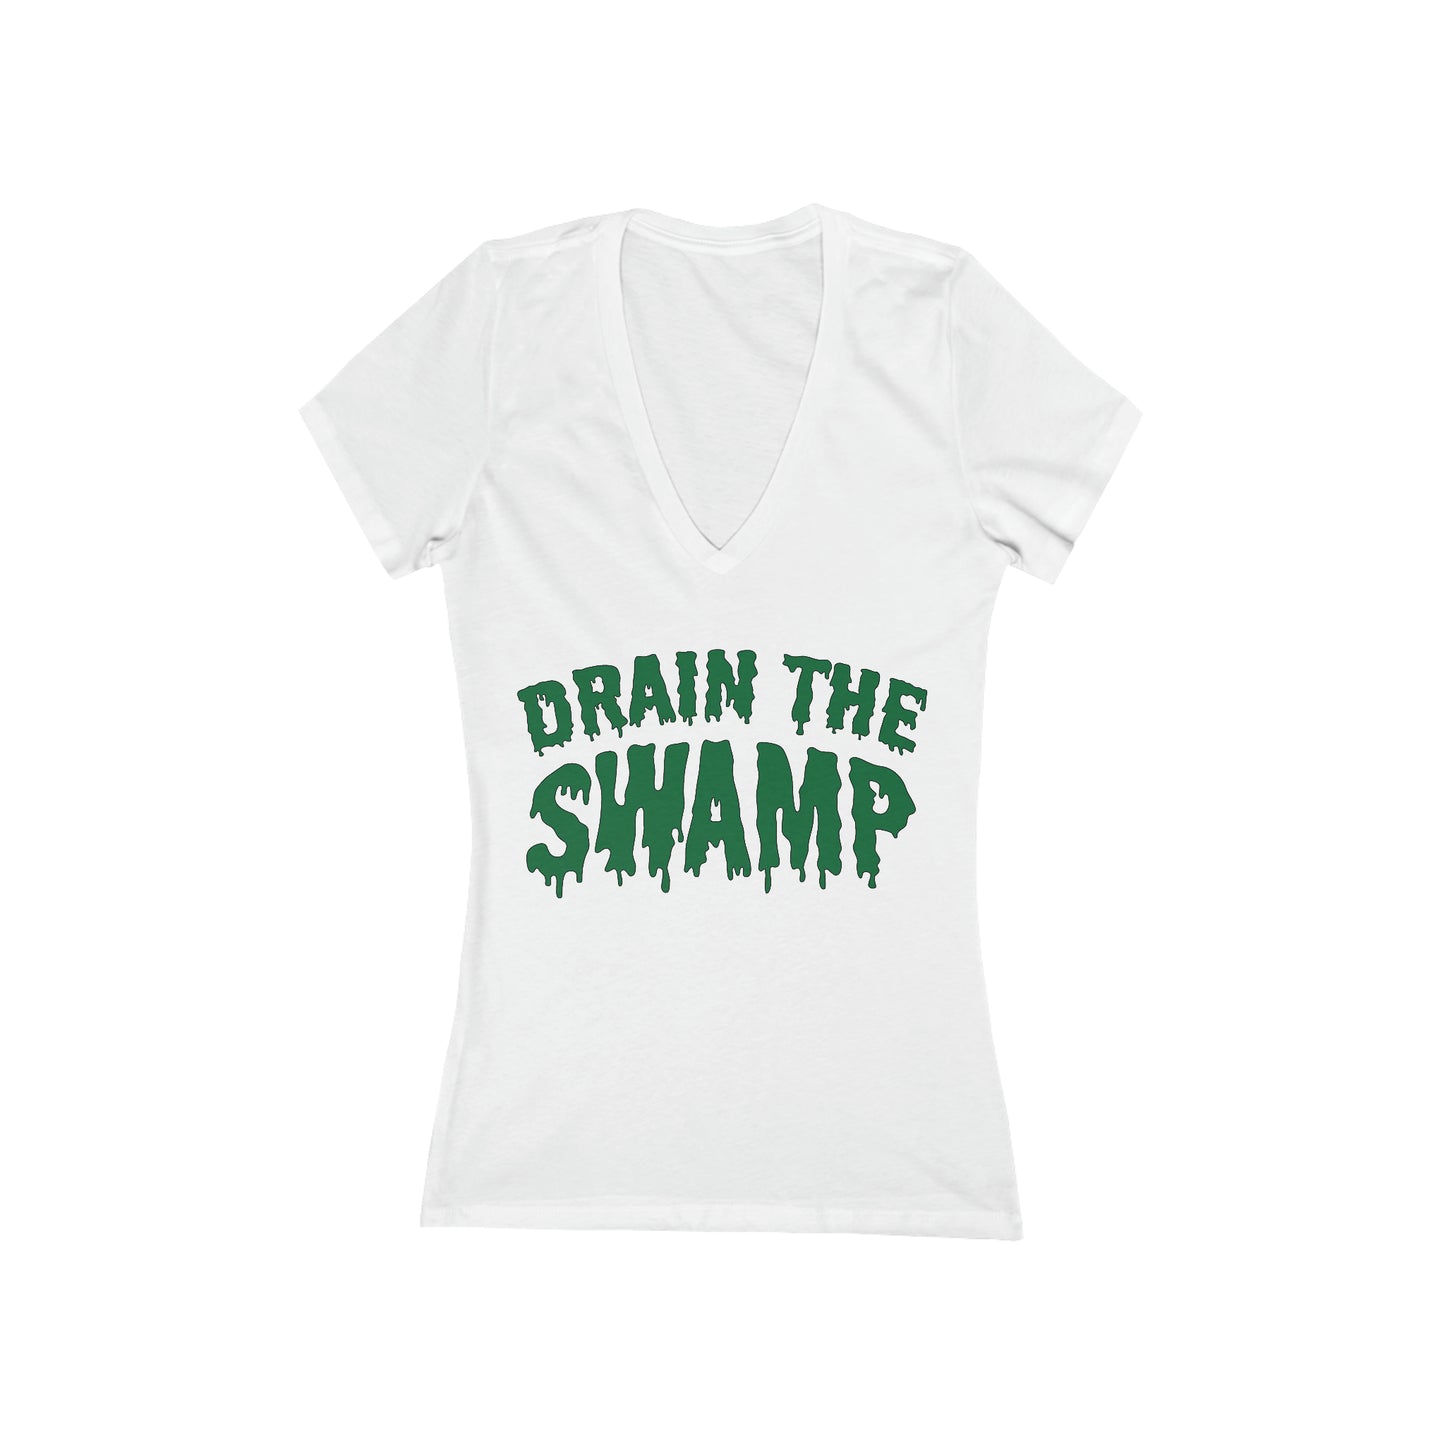 Conservative TShirt For Drain The Swamp T-shirt For Patriot Shirt For Pro Trump T Shirt For American Anti Political Corruption Shirt